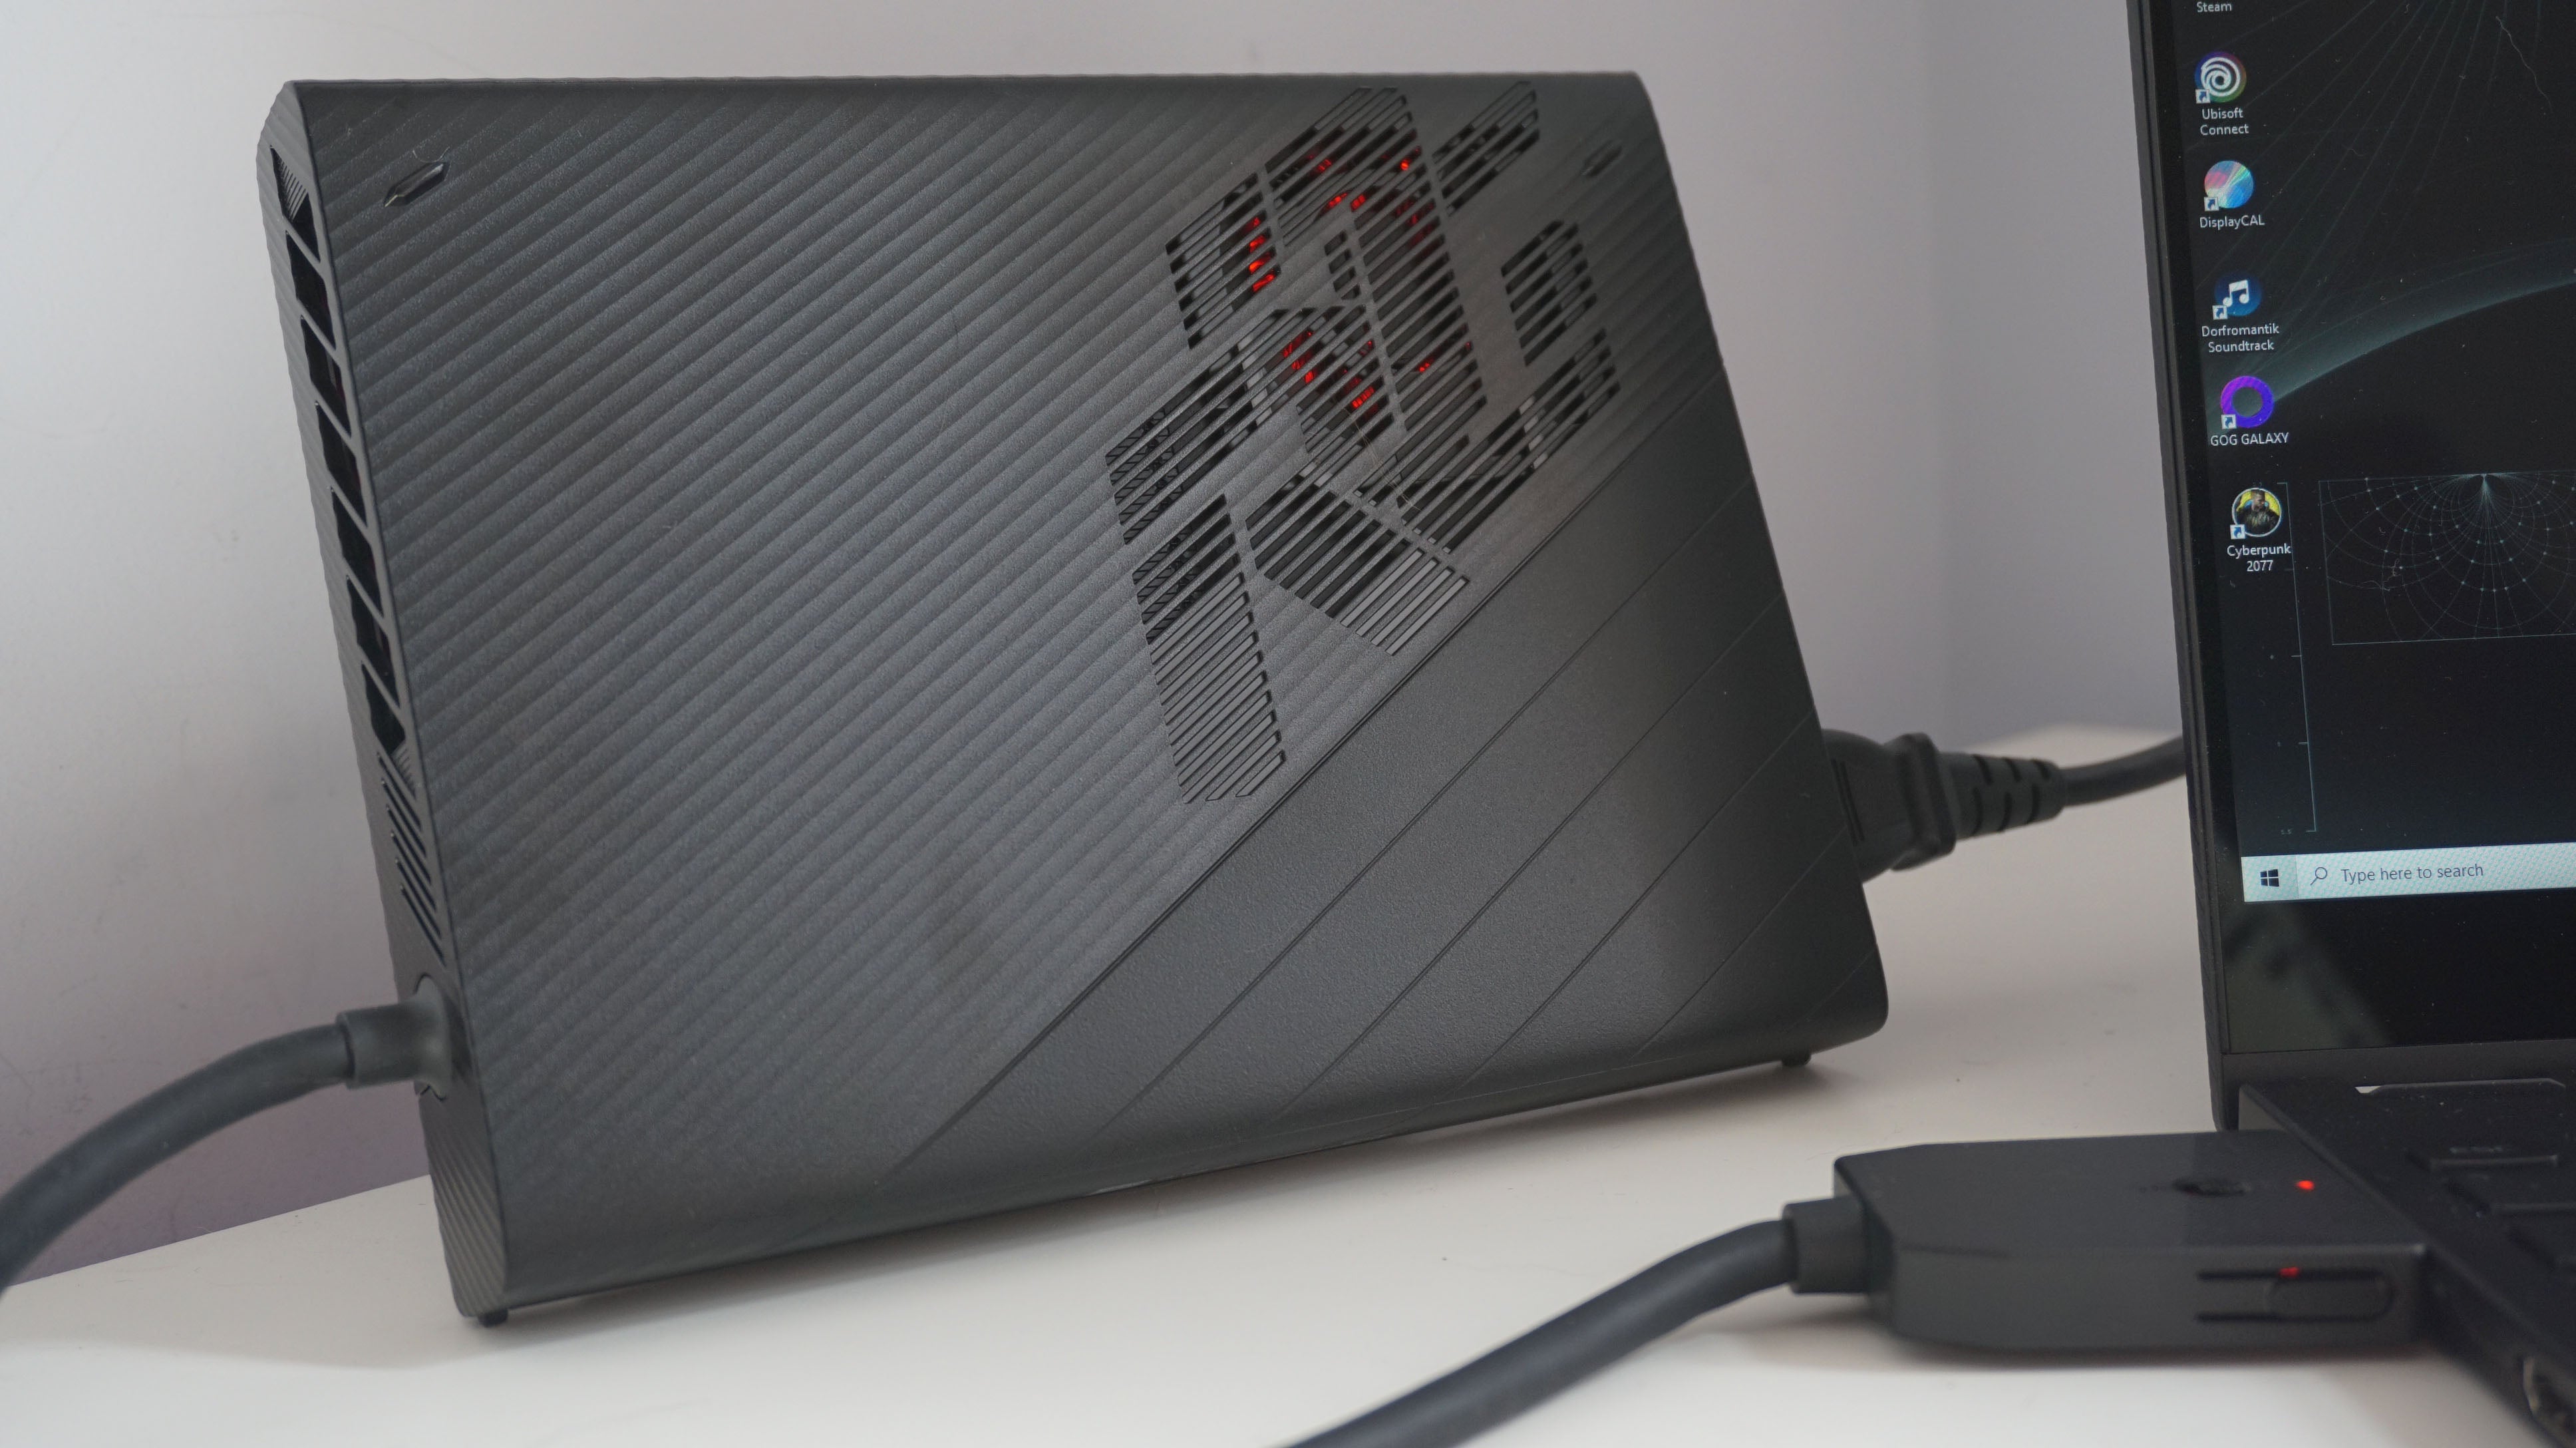 A close-up of the Asus ROG Flow X13 gaming laptop's XG Mobile eGPU